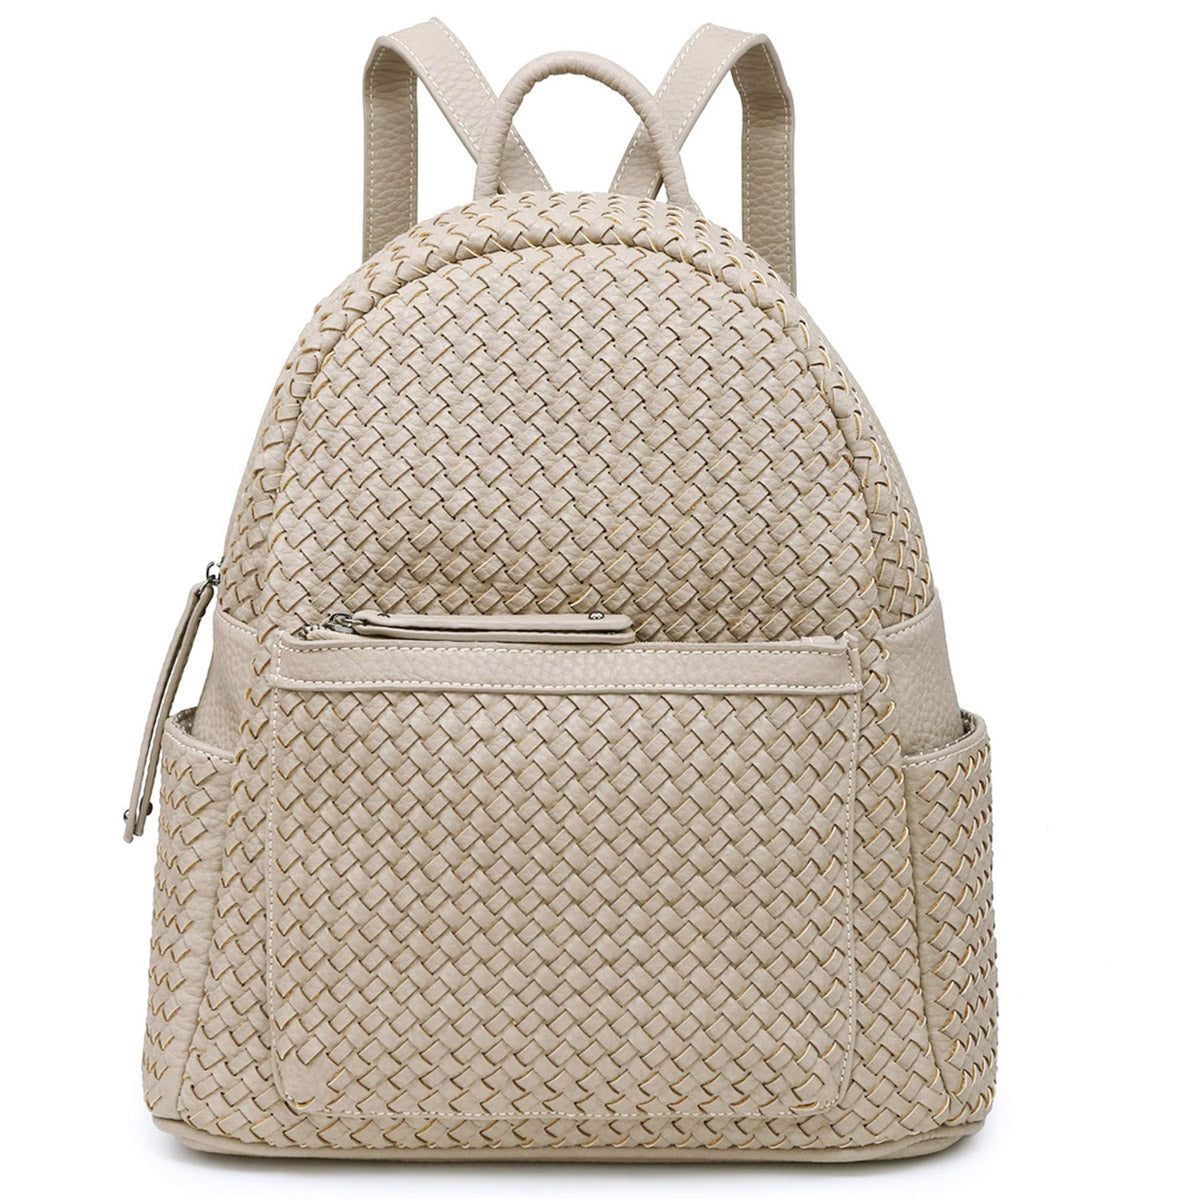 Woven Backpack Purse For Women